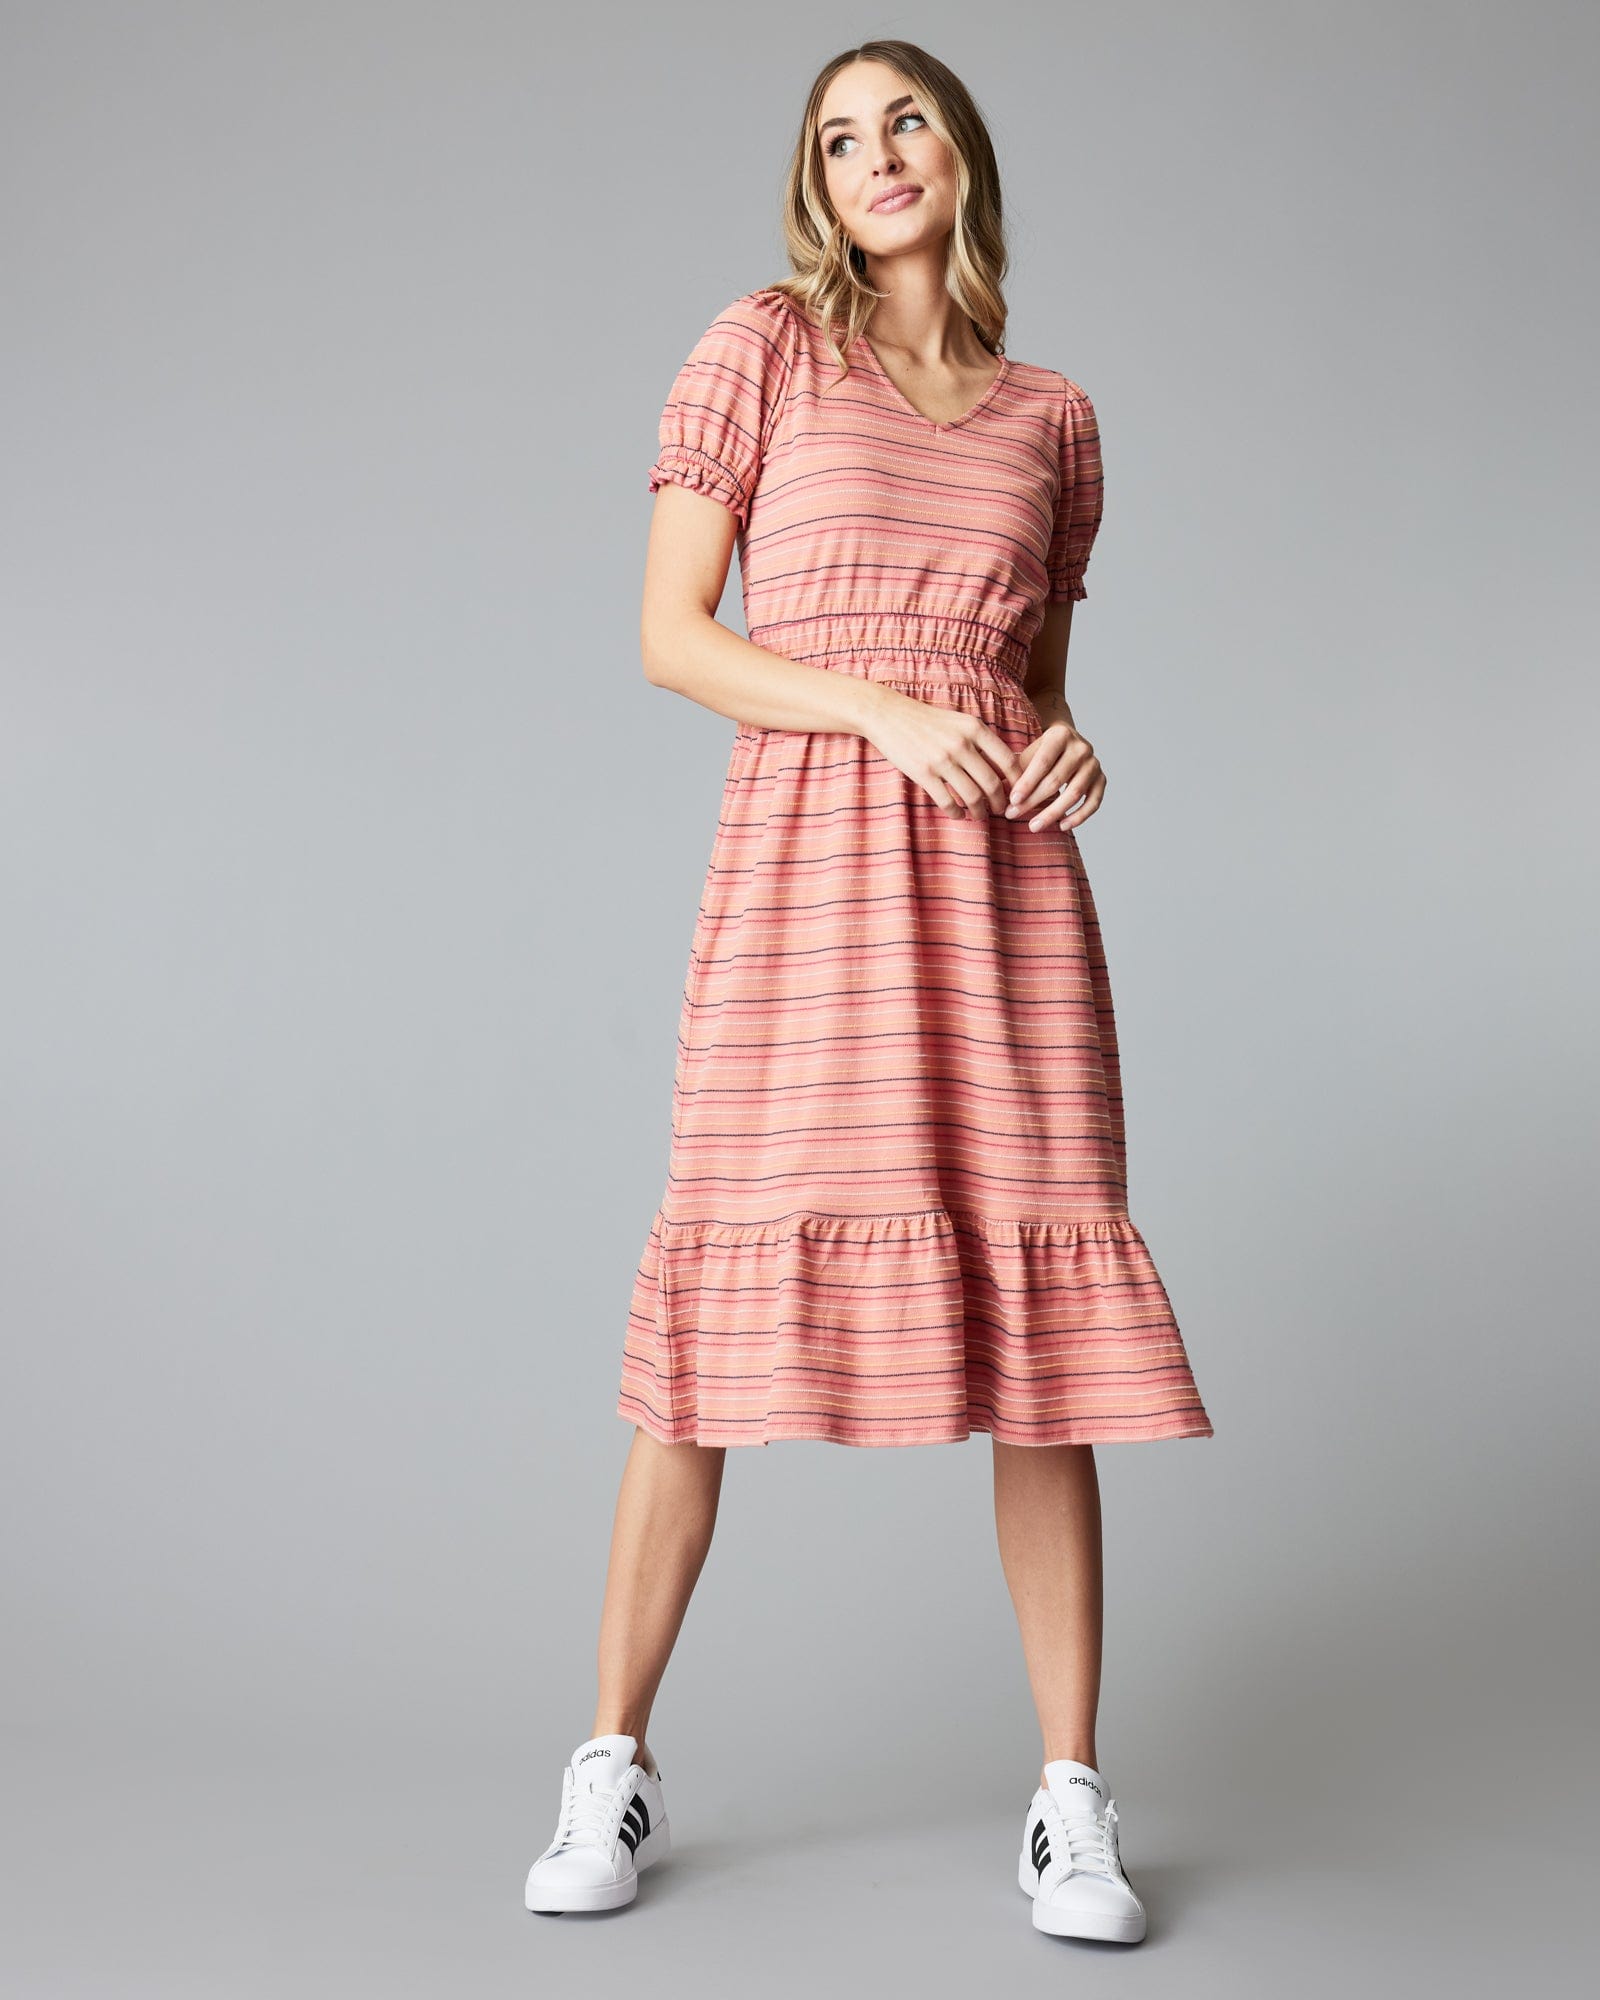 Woman in a short sleeve, striped, pink, midi-length dress